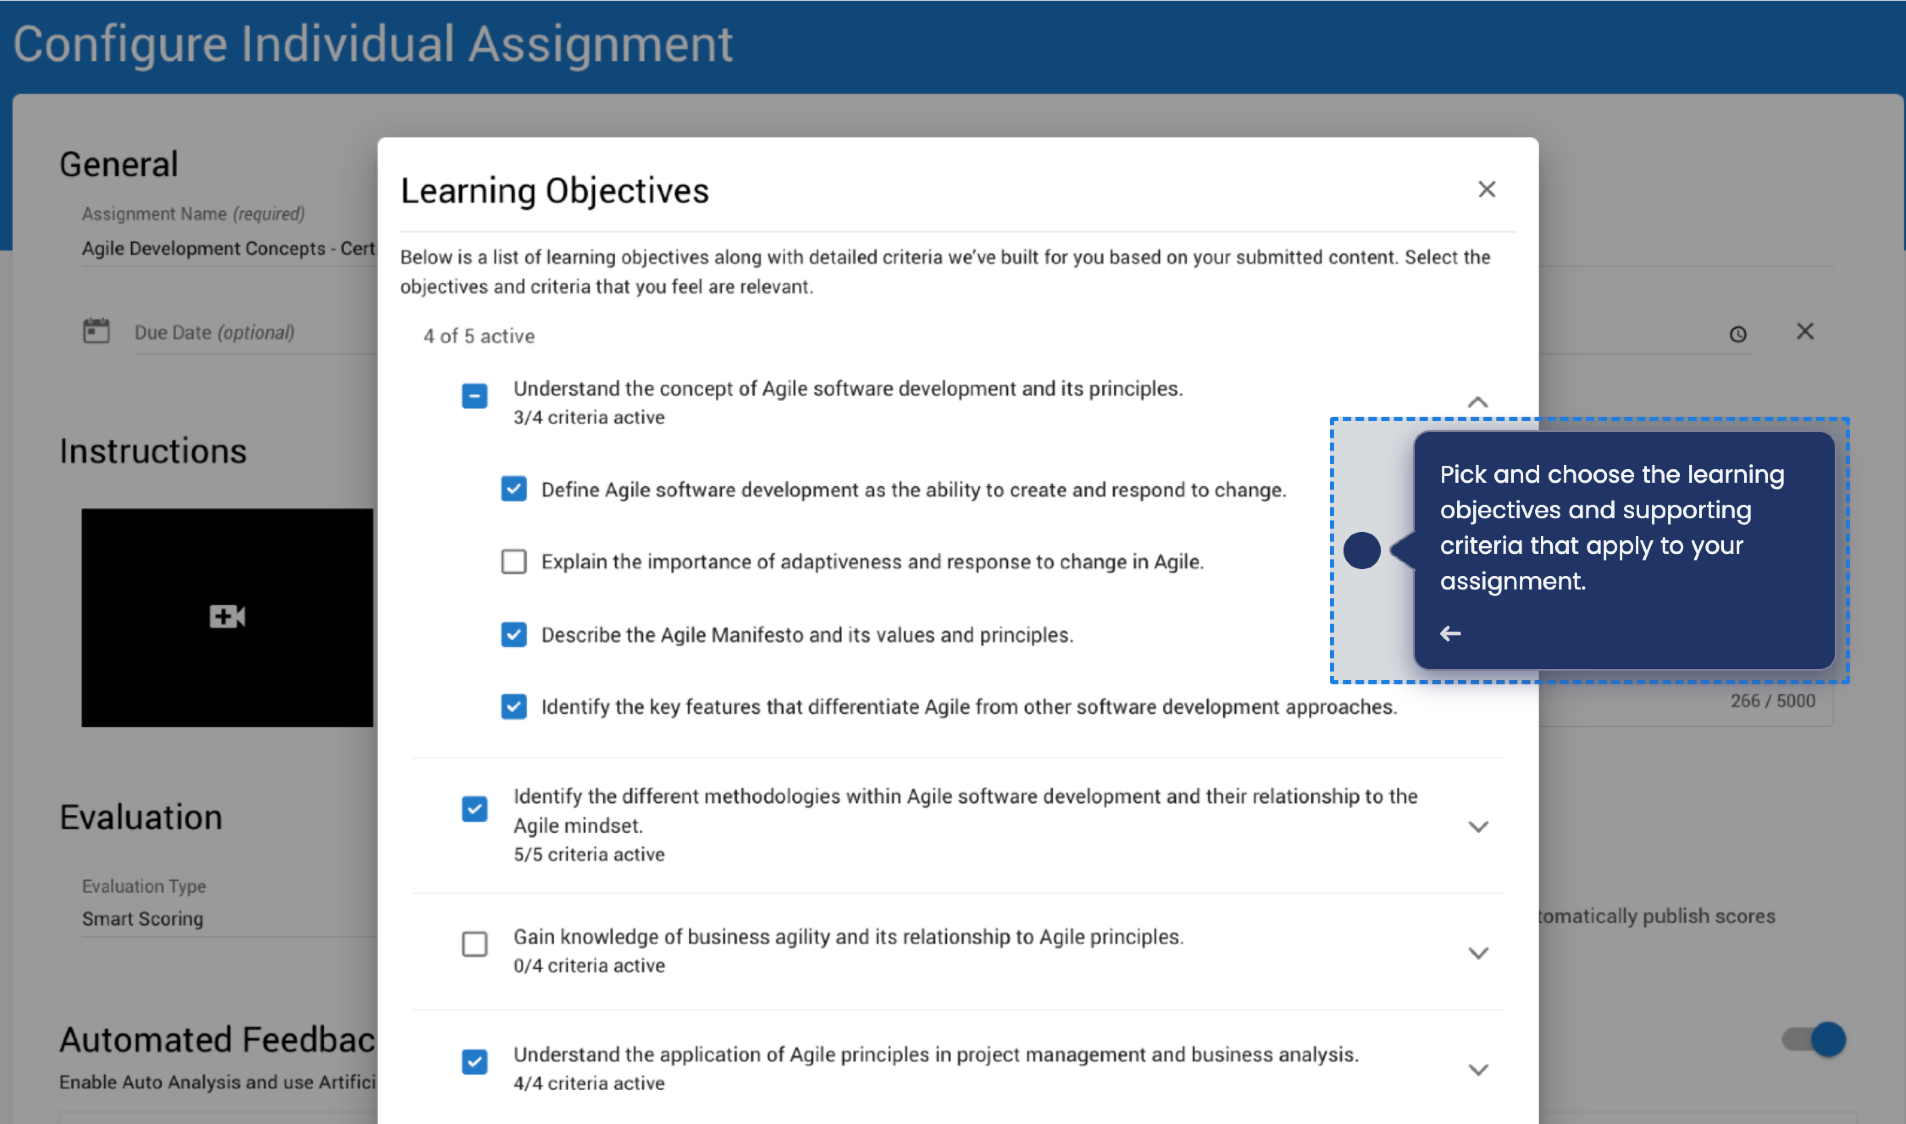 Automatically generate clear, tailored learning objectives from instructor-provided materials. Quickly upload a piece of source material and our AI will create editable learning objectives within seconds, ensuring alignment and clarity and saving time. 